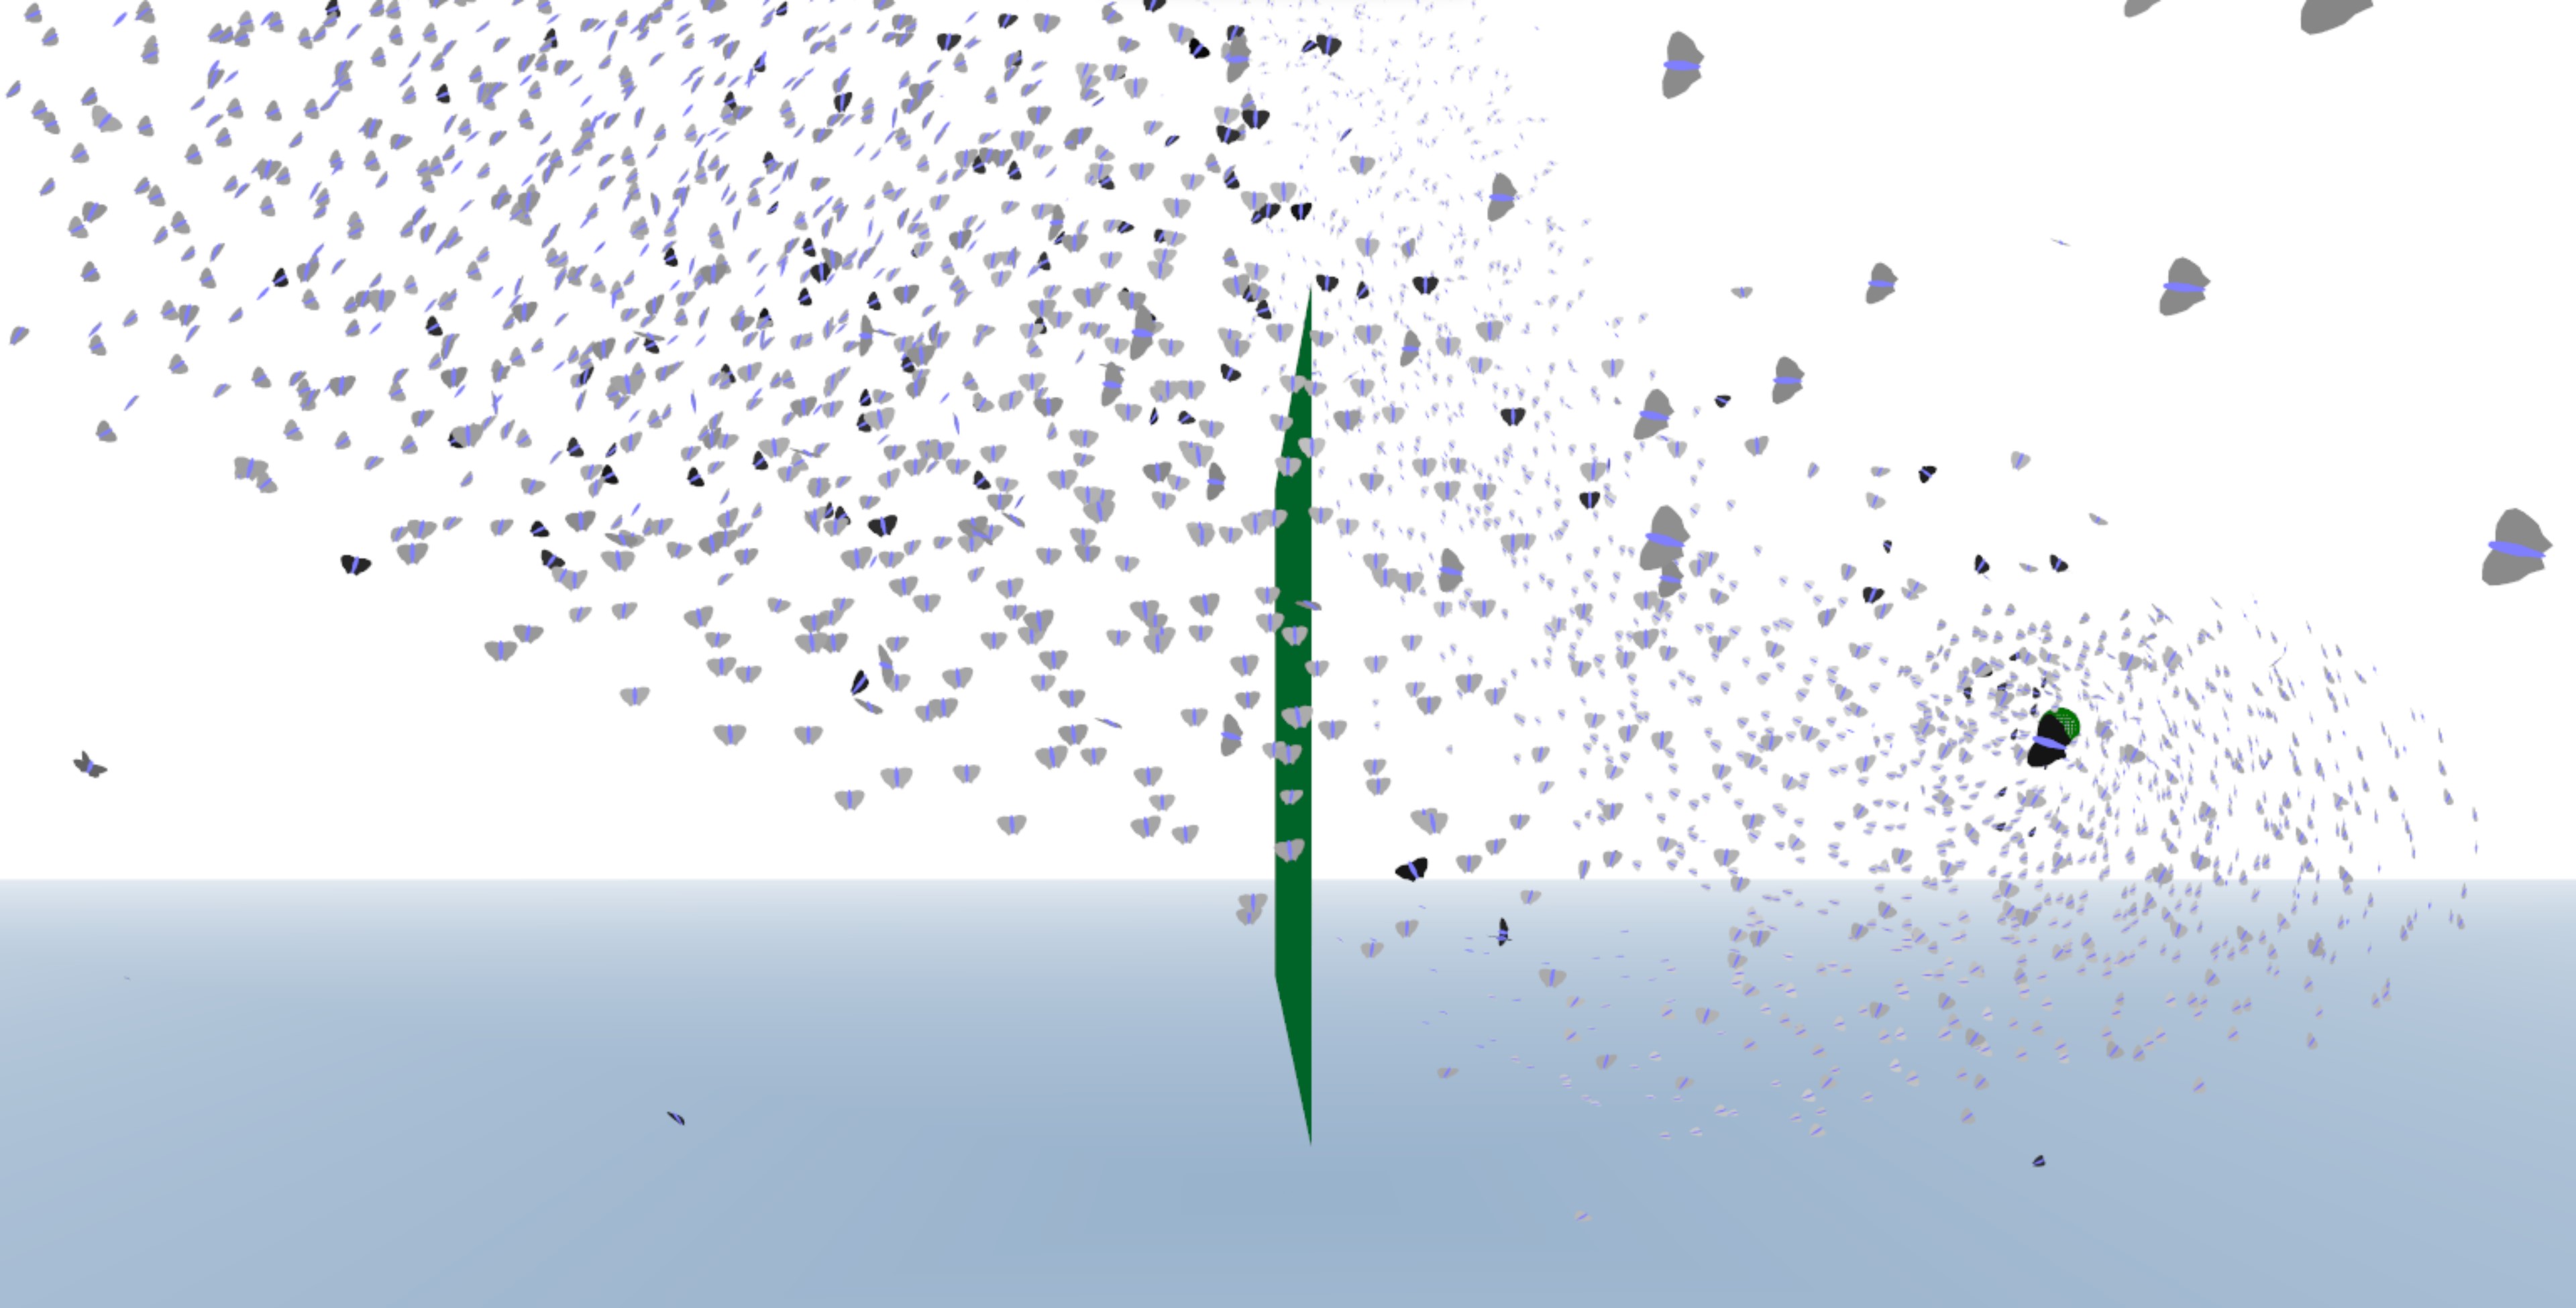 Awesome particle simulation